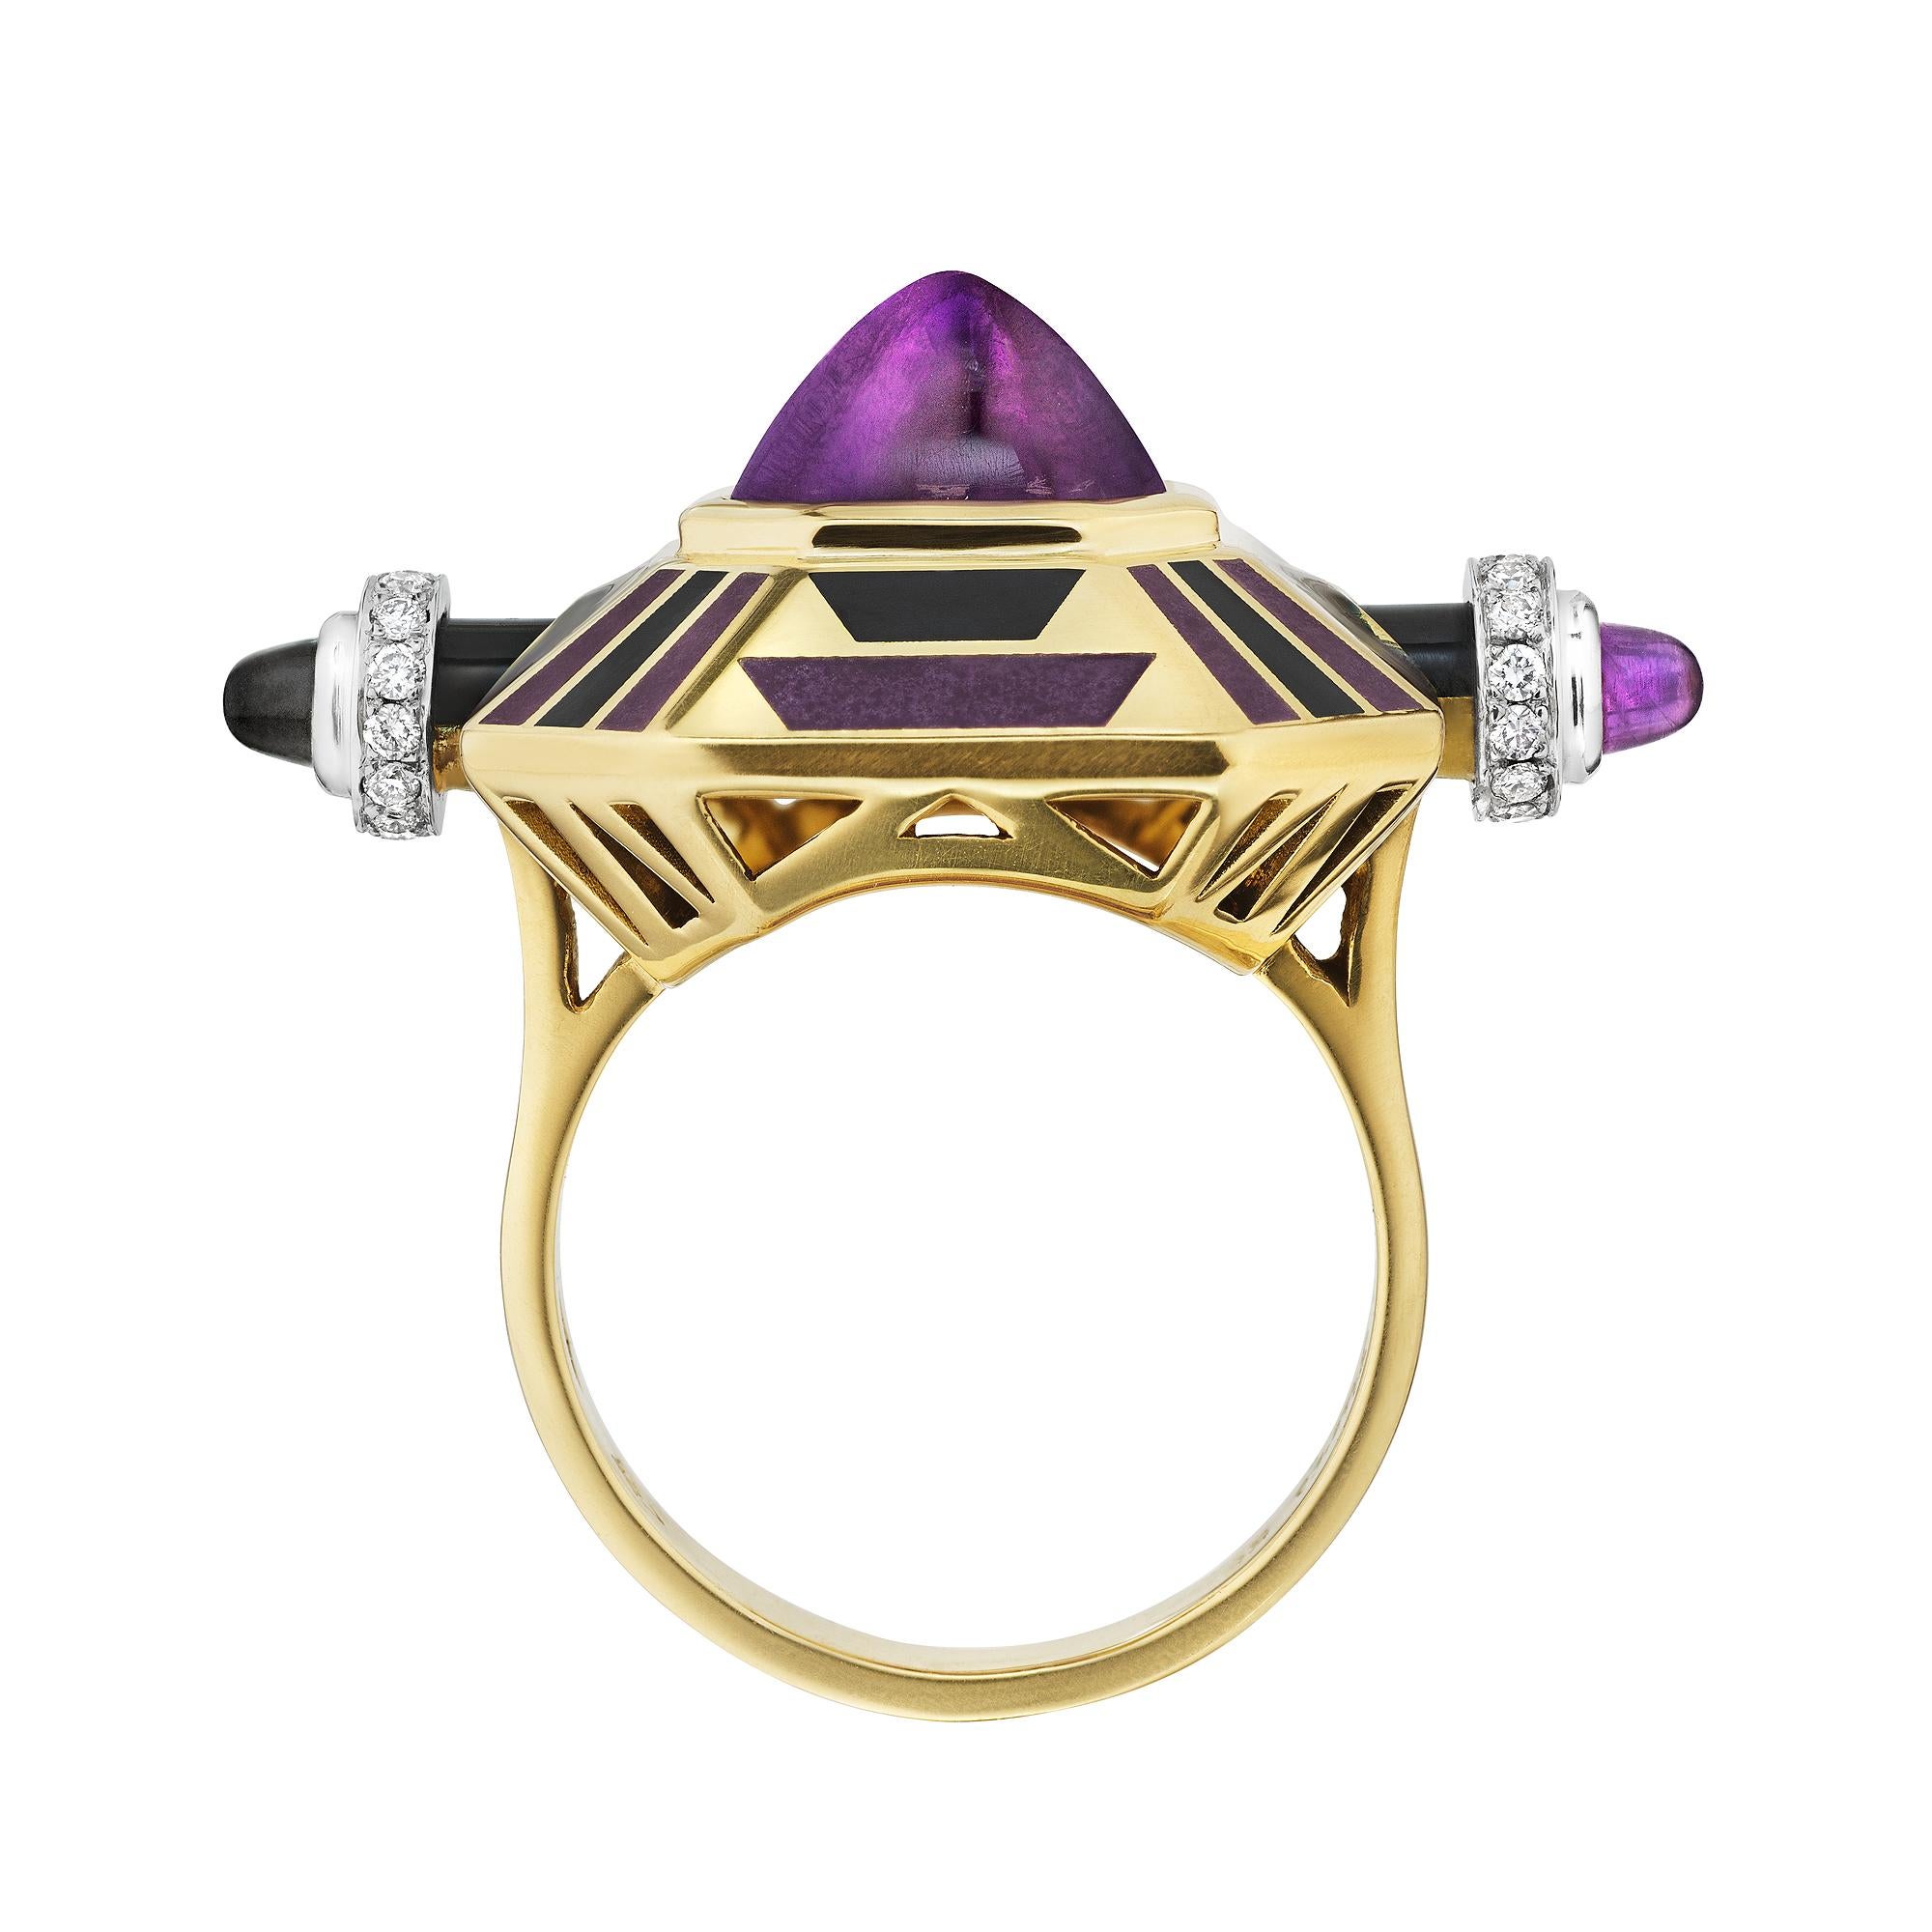 Reminiscent of the extravagant roaring twenties, this bold and beautiful Cartier Paris modernist amethyst diamond gold ring is irresistible.  With an eye-catching center set sugarloaf cabochon amethyst, mounted in a black and deep purple enameled